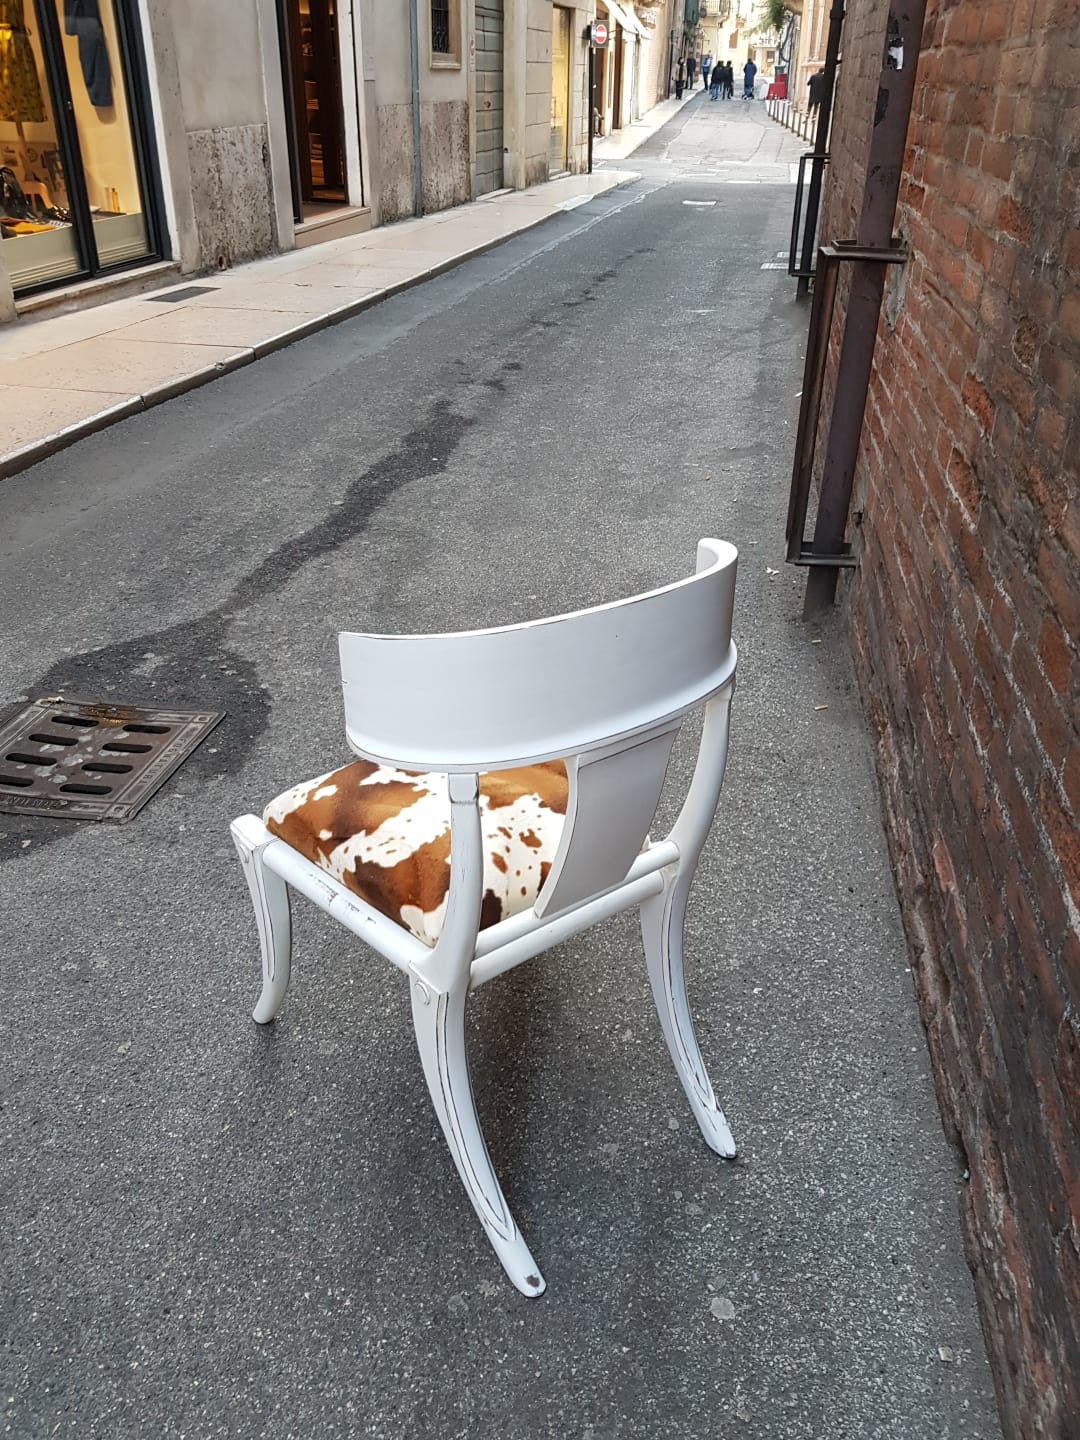 Klismos Customizable cining chairs with saber legs, White Shabby Look and Eco Fur Seats. Available in other colors and upholsteries. Italian artisanal production by Pescetta Home Decoration.


Walnut wood chairs with deep and large seat and back